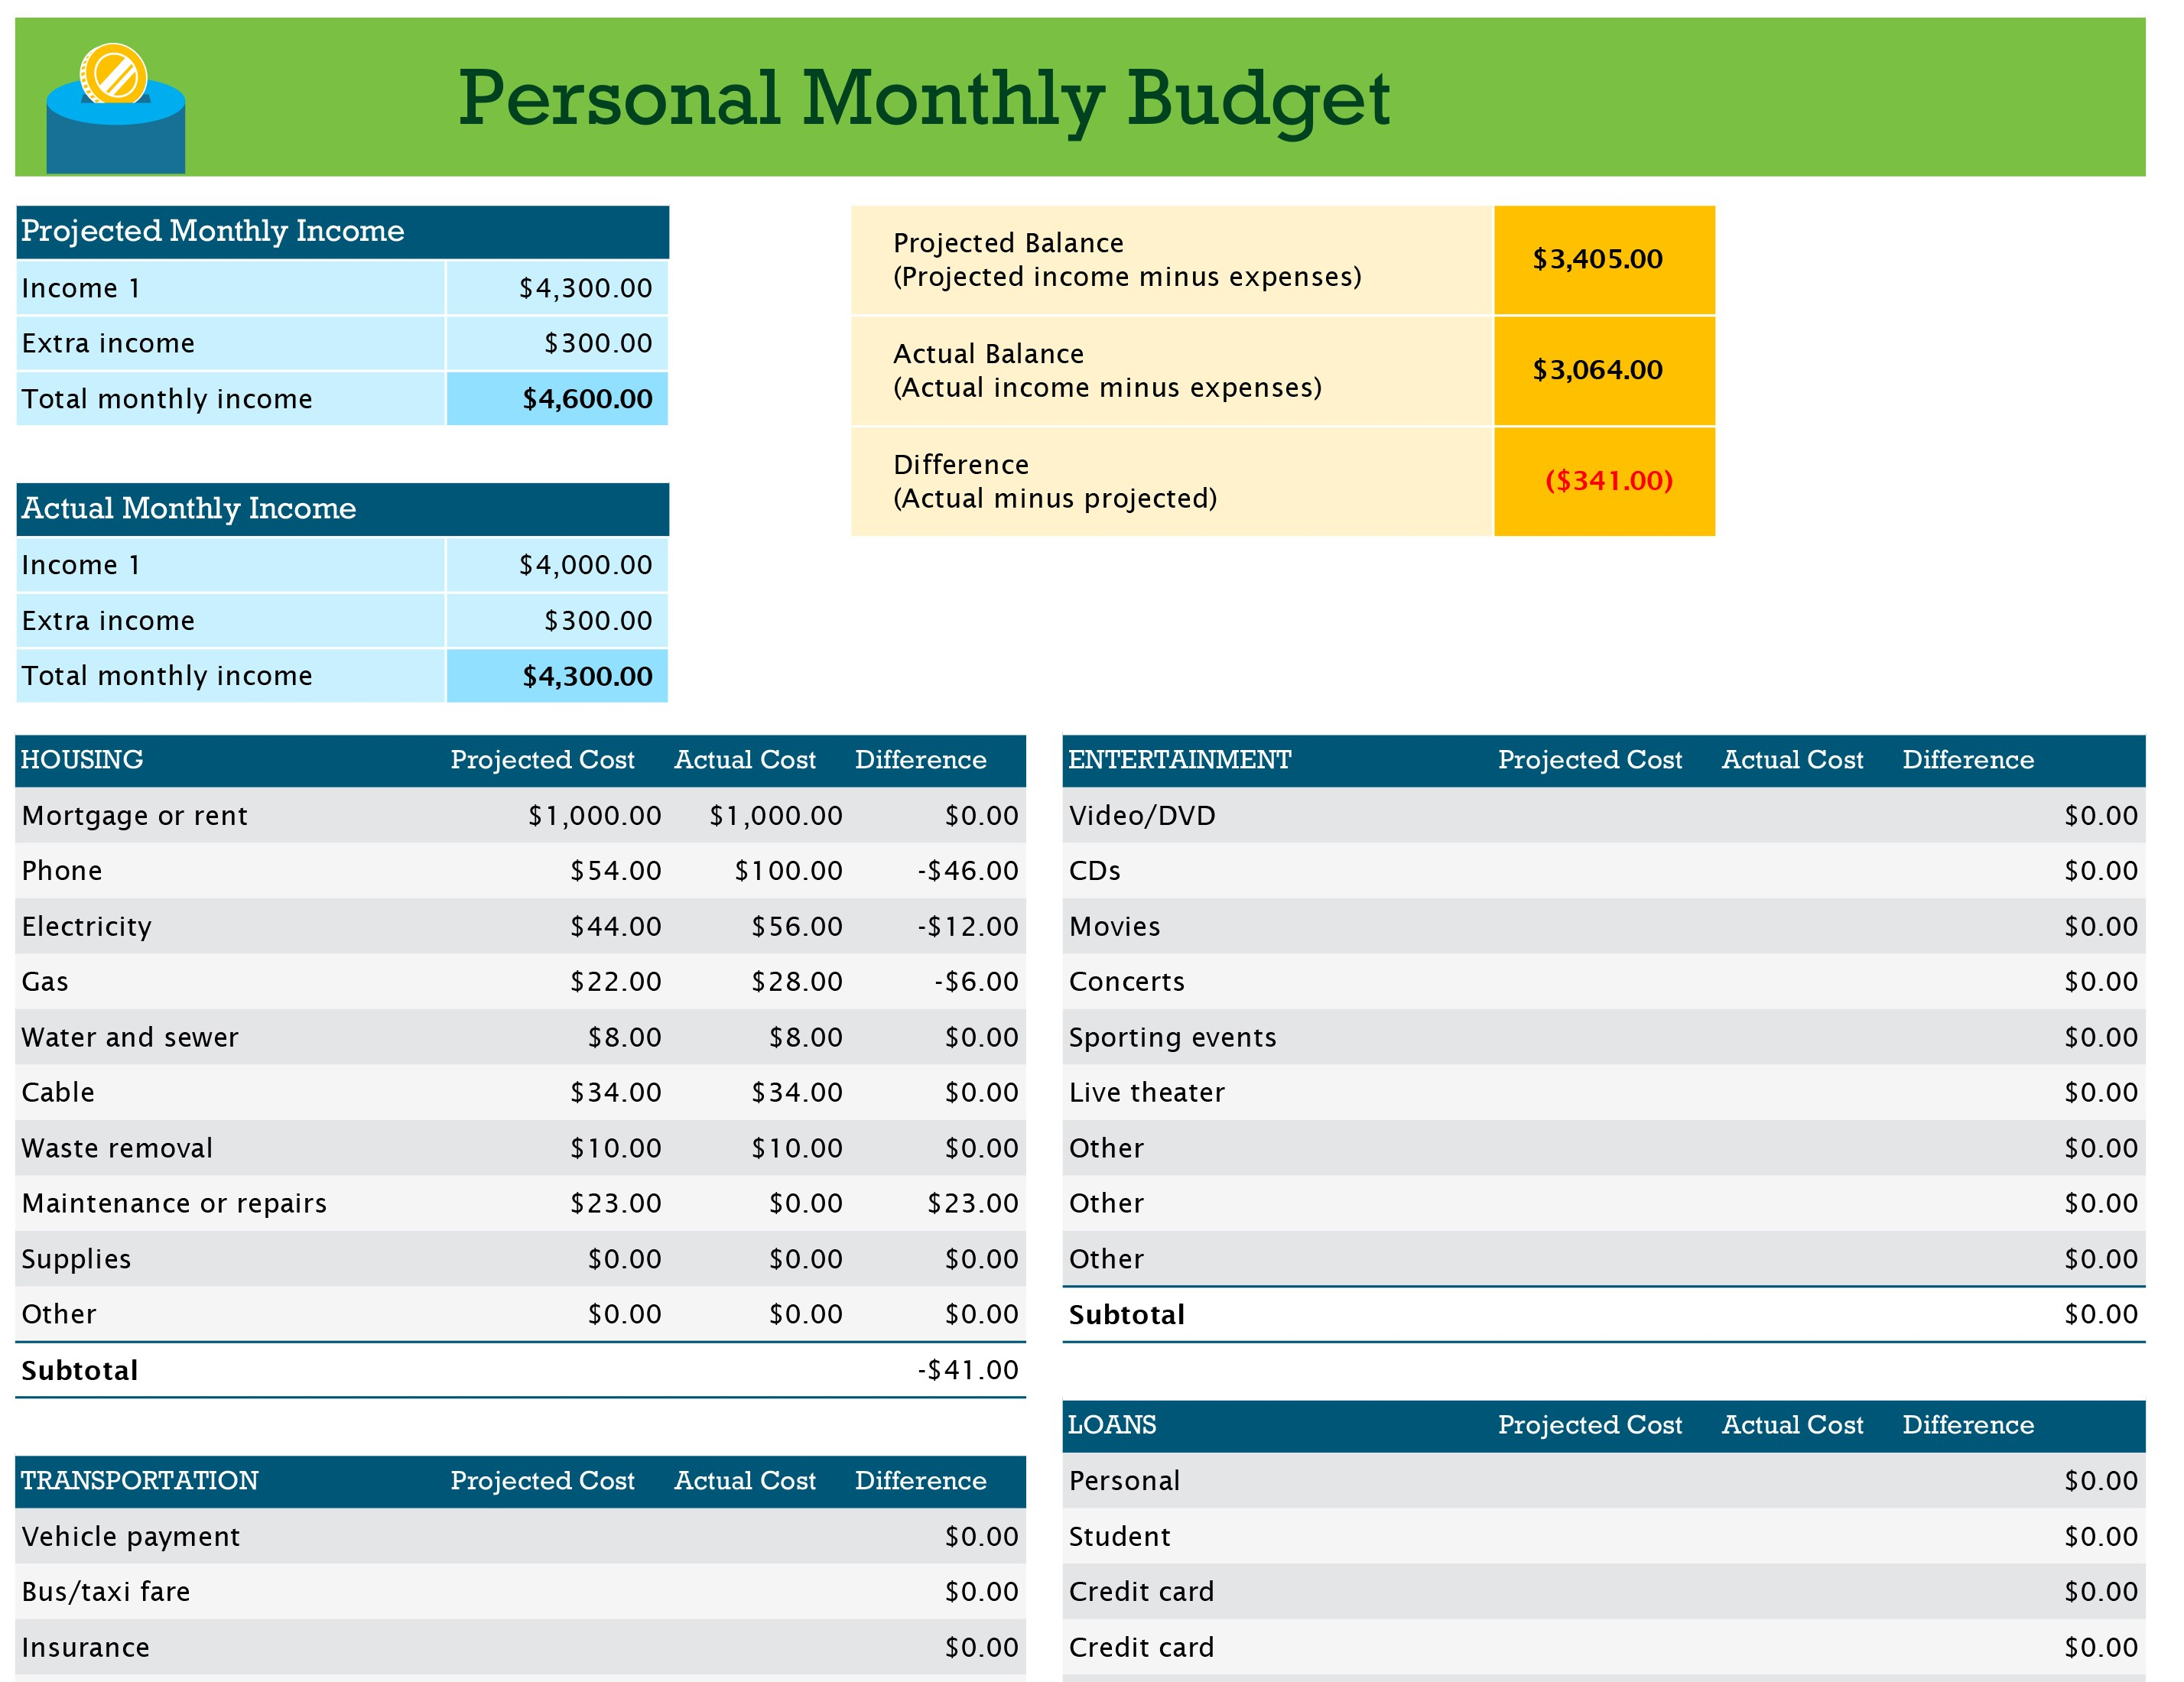 Monthly Budget Spreadsheet Excel Pertaining To Personal Monthly Budget Excel